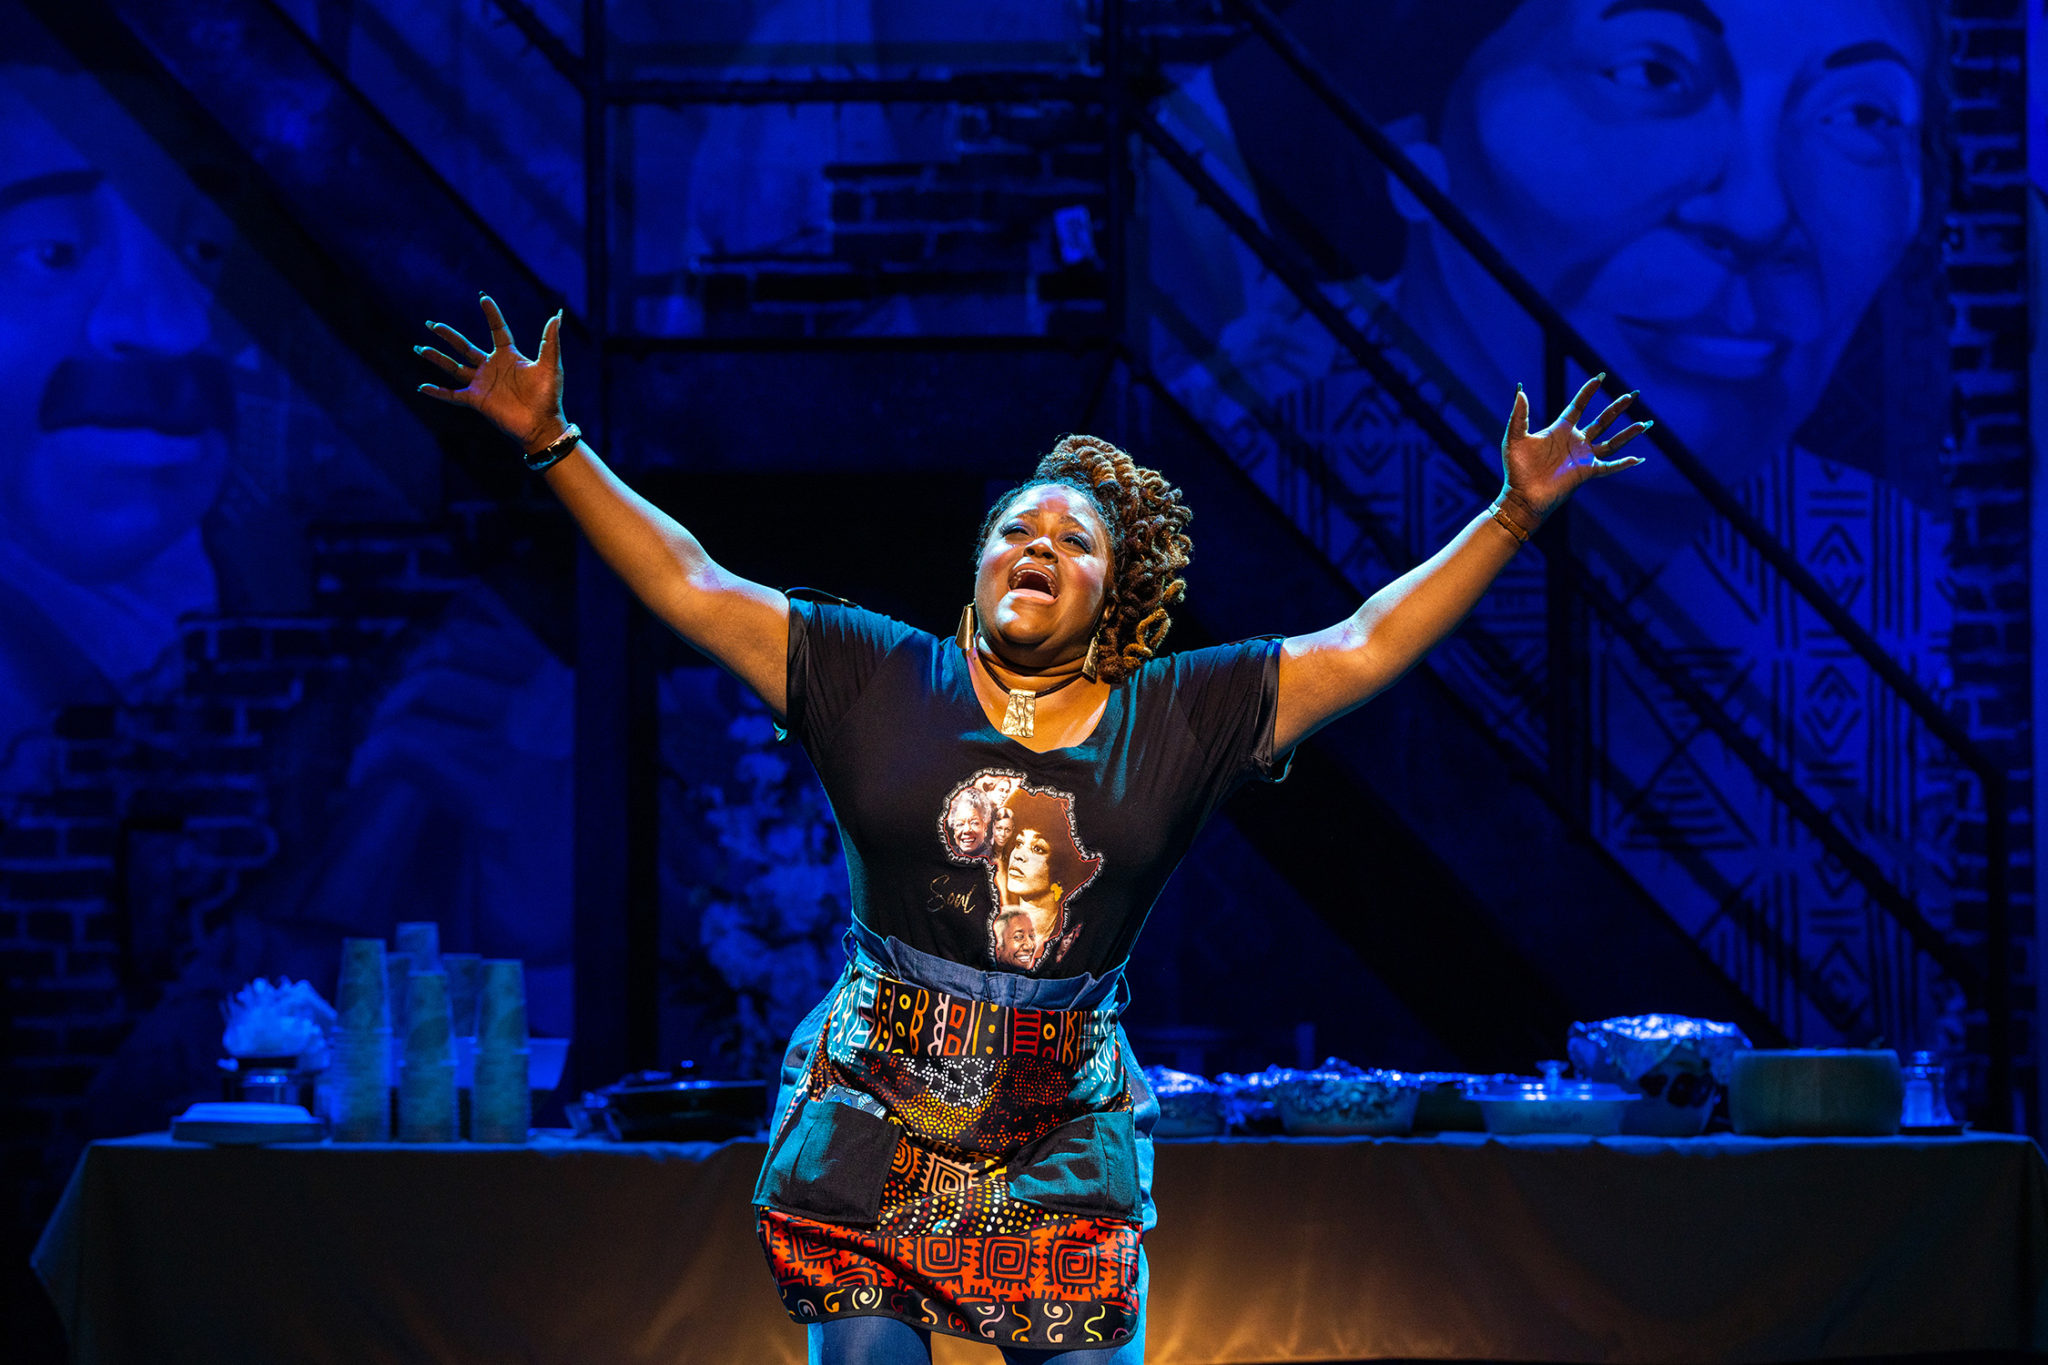 Nova Y. Payton as Ruthie in the 2022 Ford’s Theatre world-premiere musical “Grace.” The production features Music and Lyrics by Nolan Williams, Jr.; Book by Nolan Williams, Jr., and Nikkole Salter and is Directed and Choreographed by Robert Barry Fleming. Scenic Design by Jason Ardizzone-West, Costume Design by Dominique Fawn Hill, Lighting Design by Xavier Pierce, Sound Design by David Budries, Hair and Wig Design by Nikiya Mathis, Dramaturg Martine Kei Green-Rogers, Creative Consultant Sheldon Epps, Orchestrations by Joseph Joubert and Music Director Nolan Williams, Jr. Photo by André Chung.